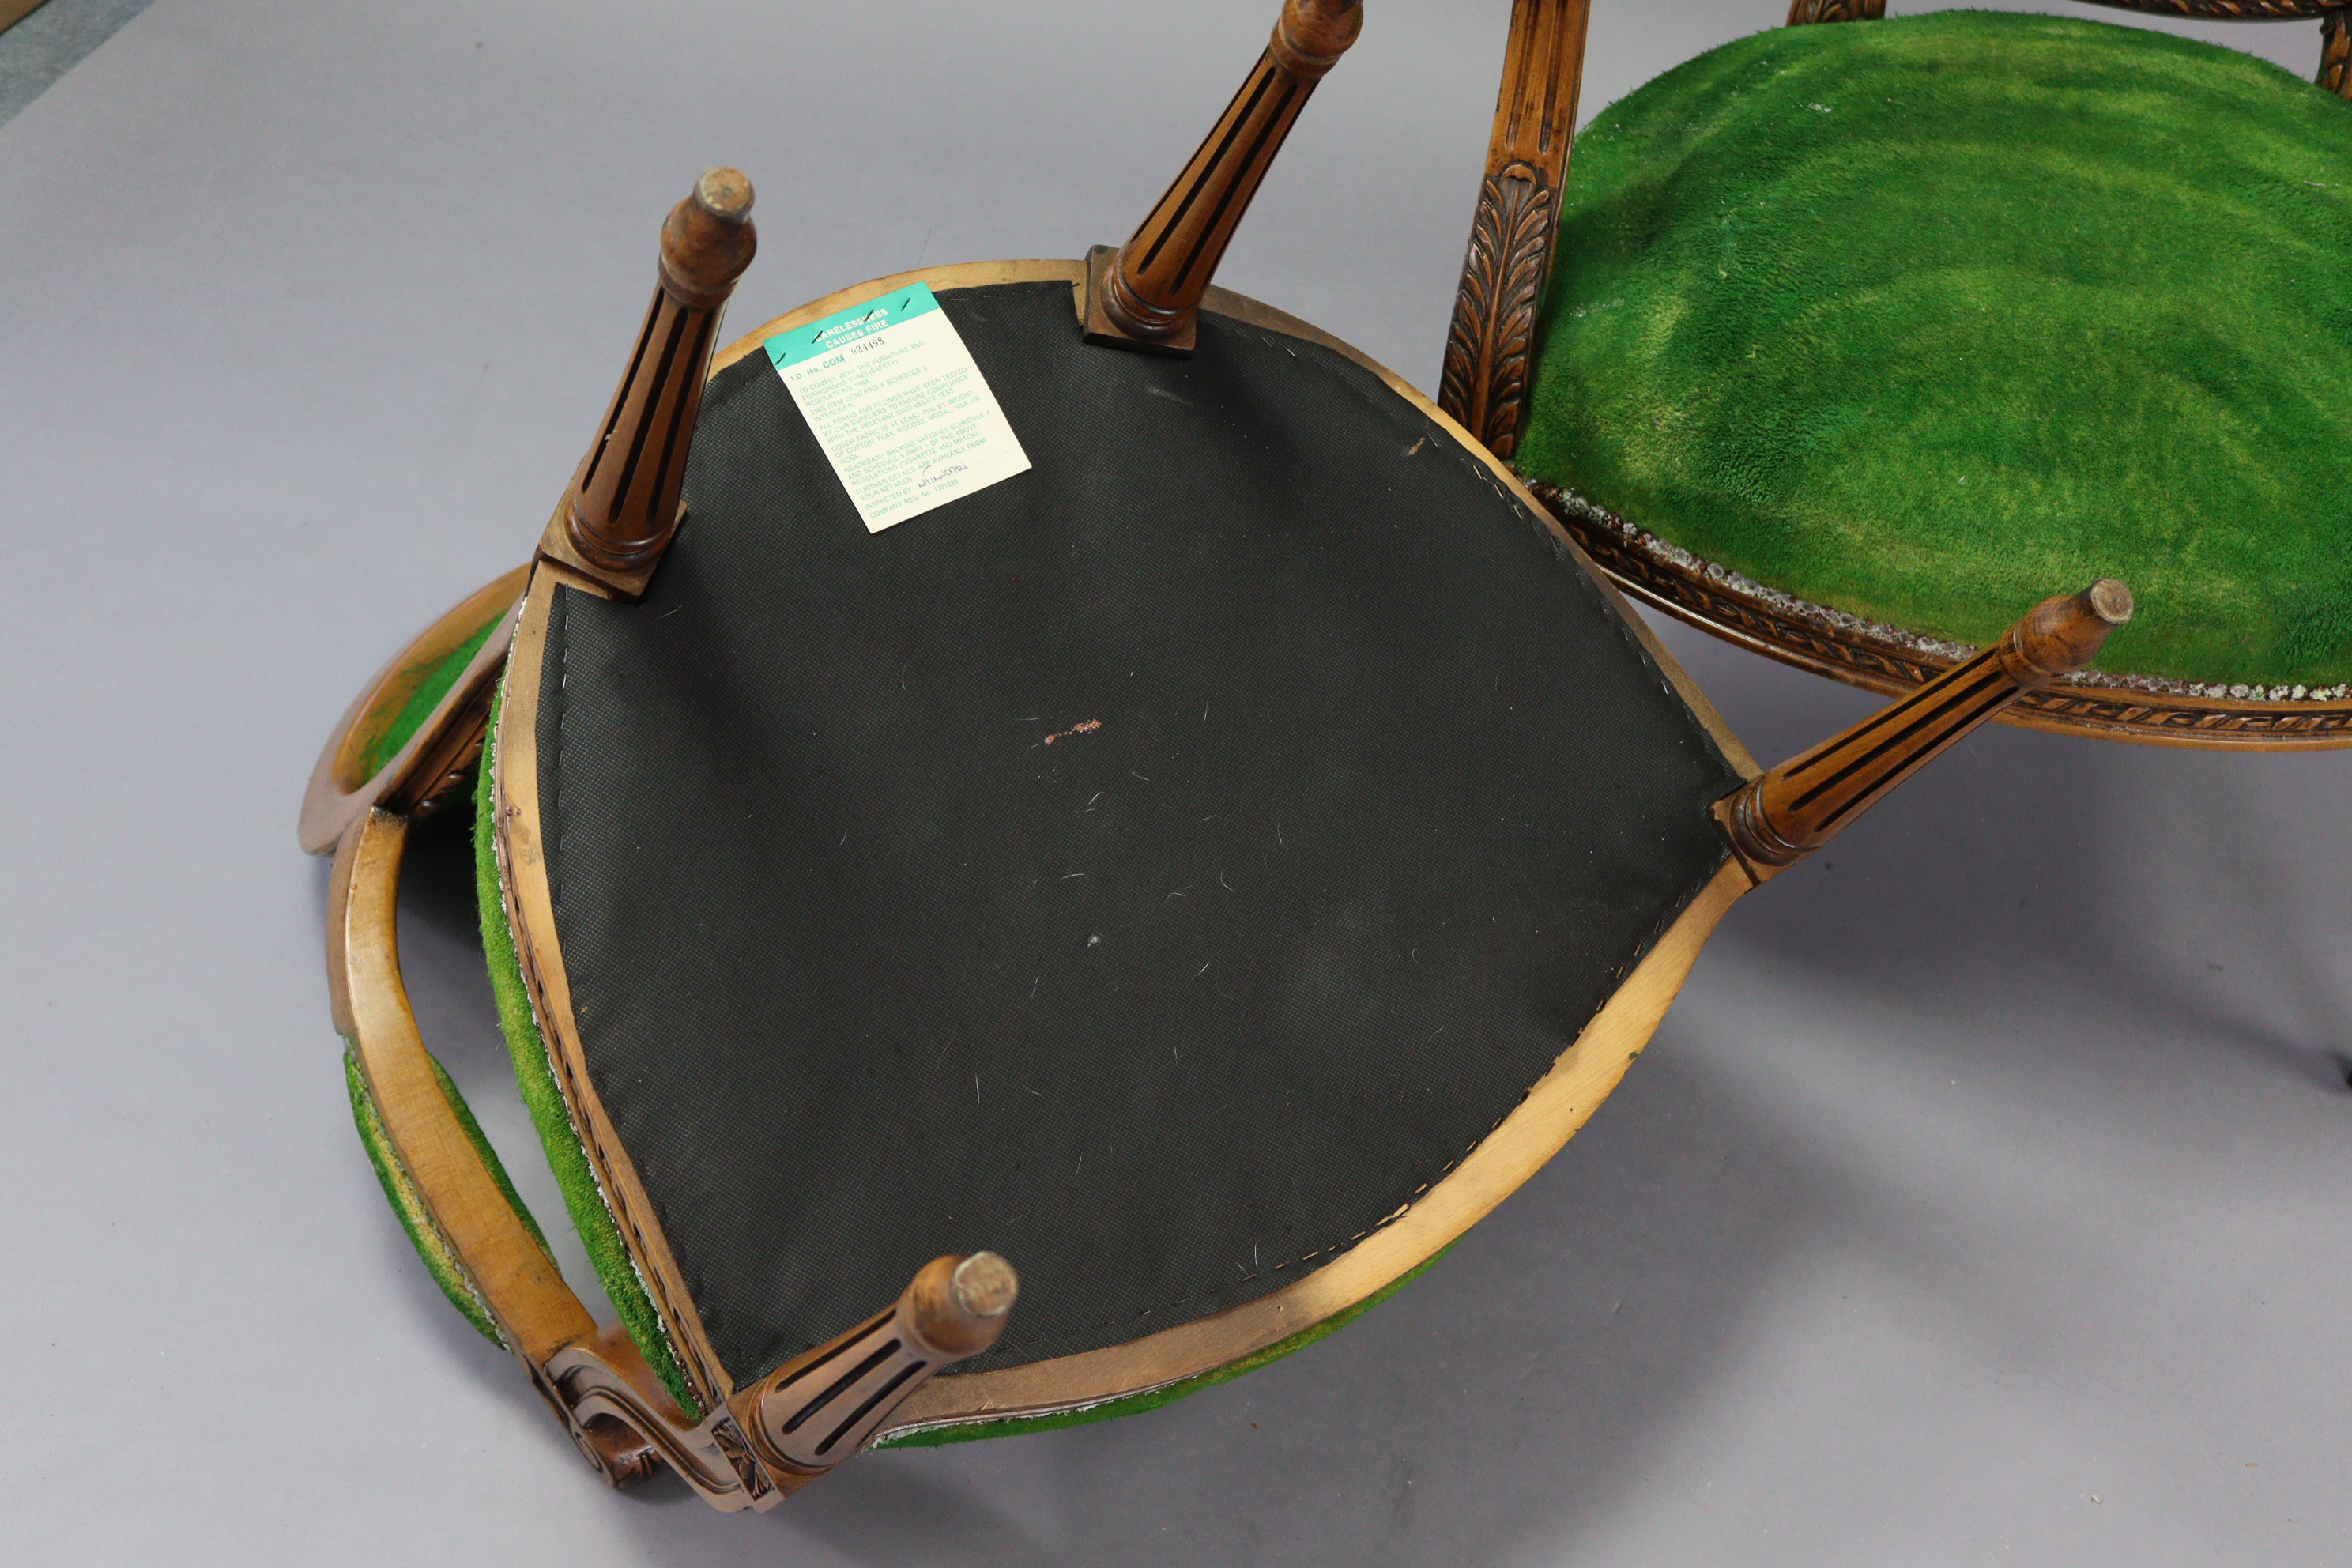 A pair of Louis XVI-style carved beech frame armchairs with padded seats & backs upholstered green - Image 2 of 2